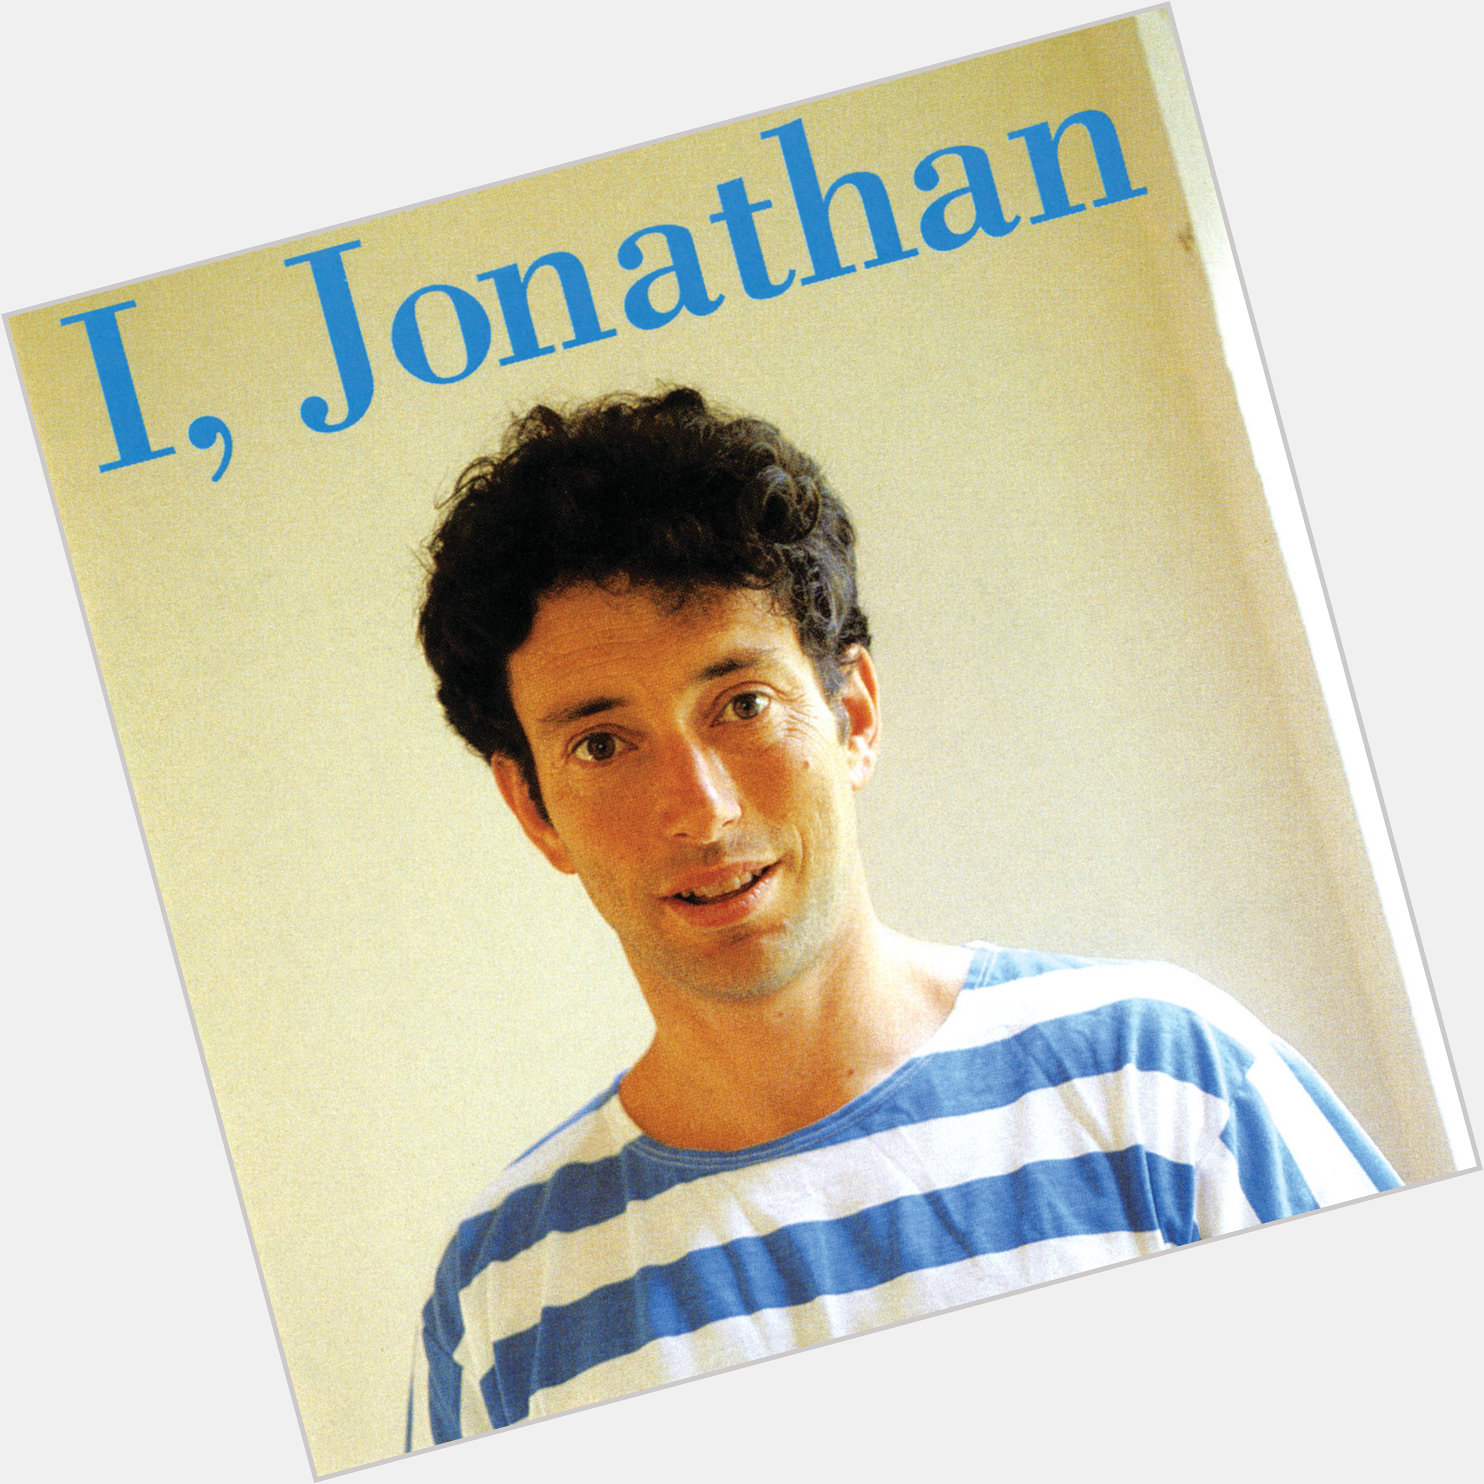 Happy birthday to the great Jonathan Richman who you can catch on tour in June  